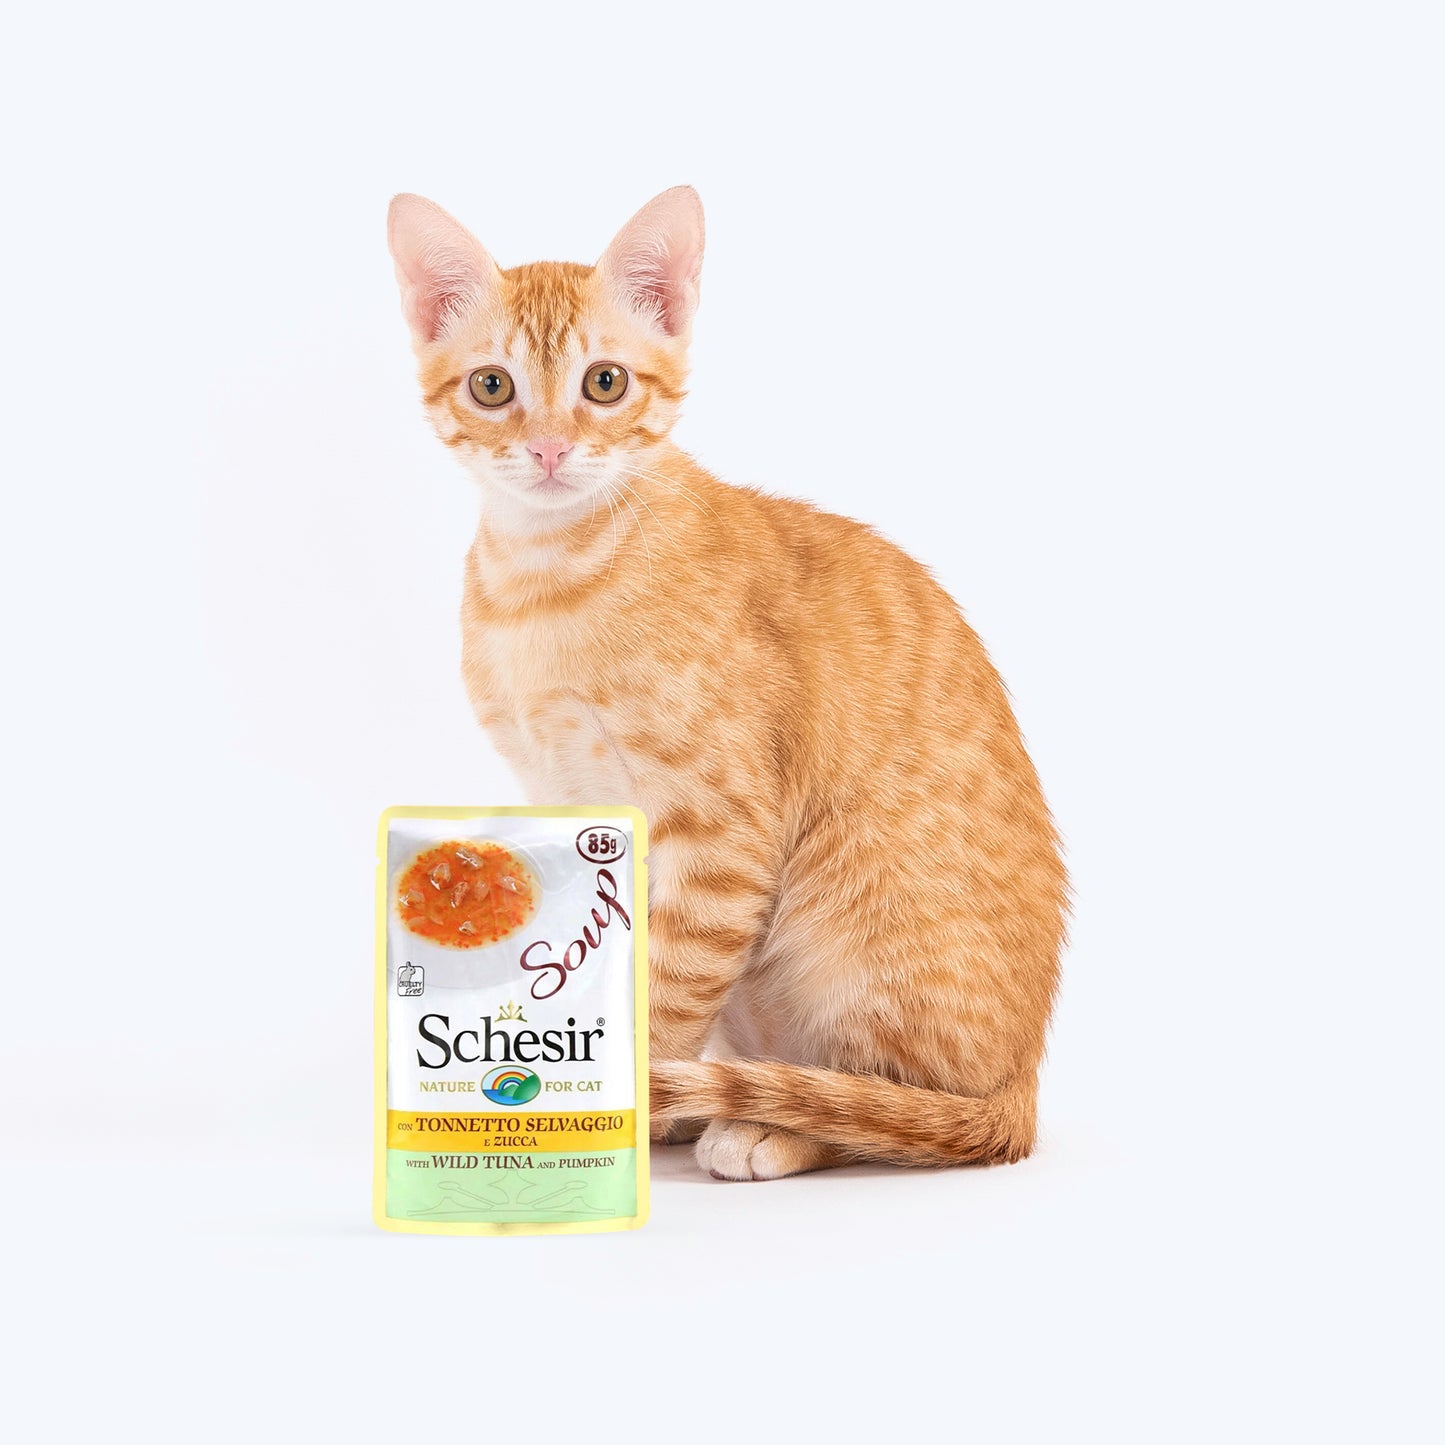 Schesir 70.5% Tuna and Pumpkin Wild Soup For Adult Cats - 85 g_02